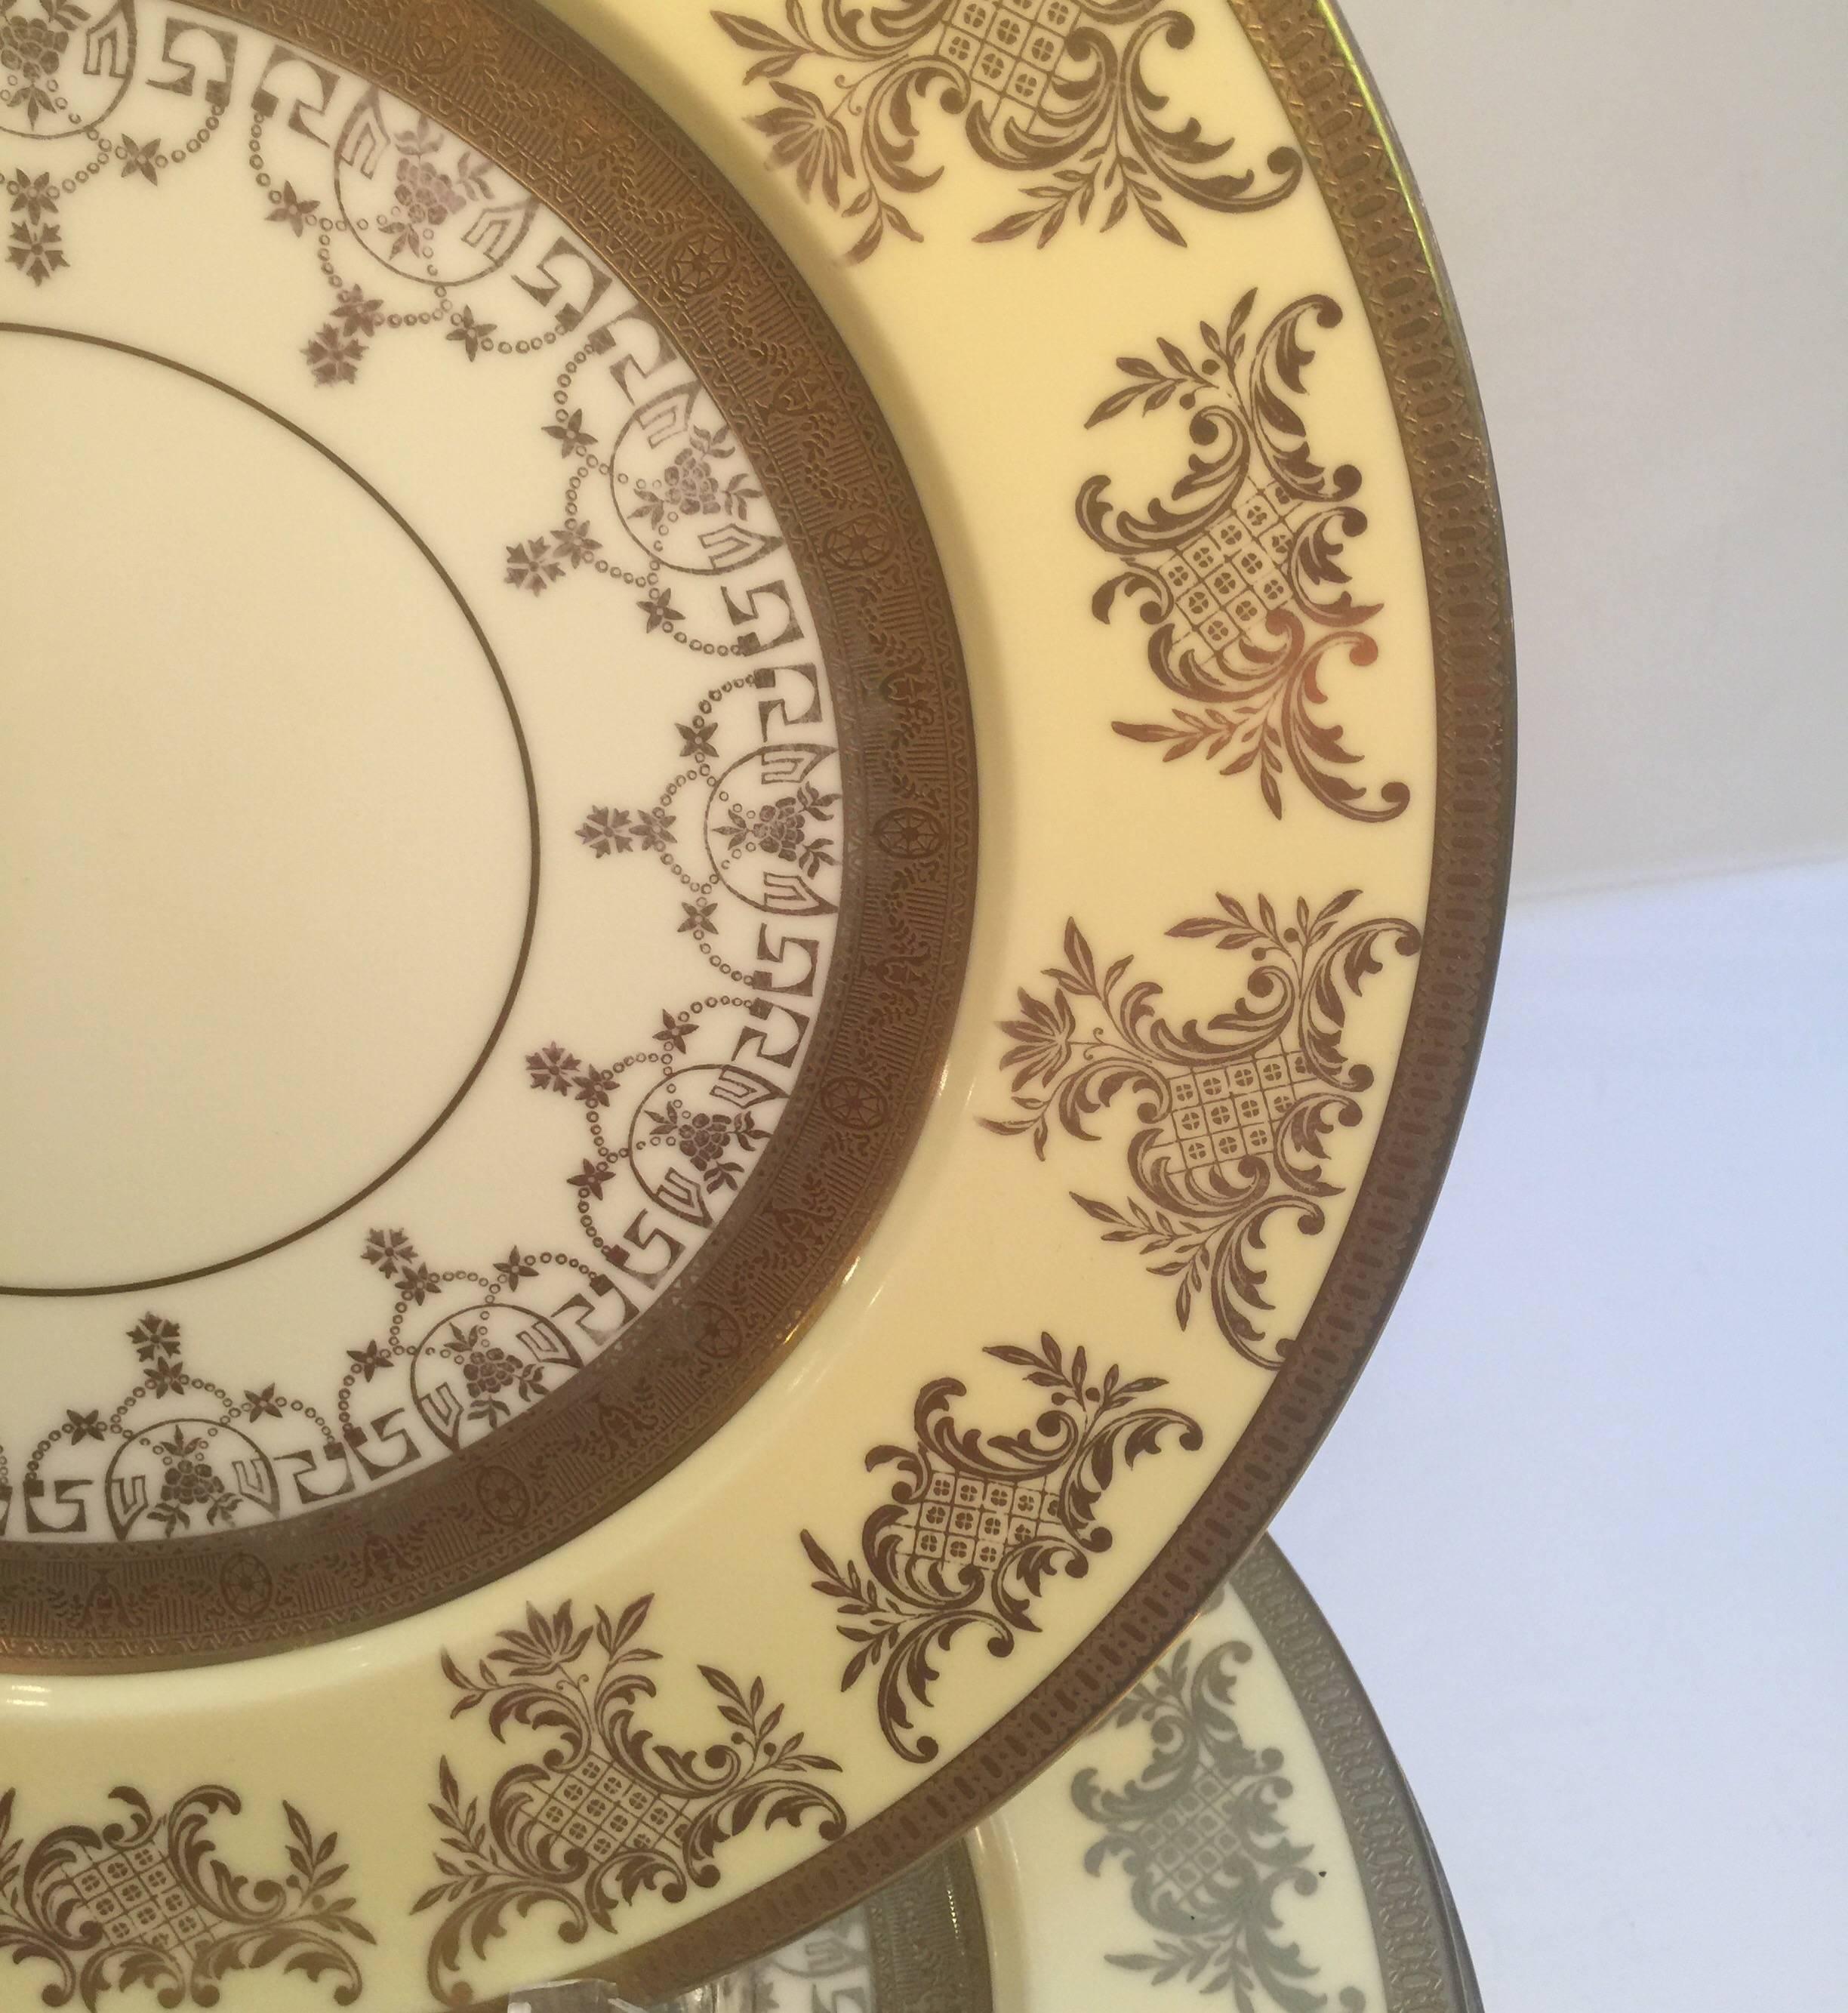 A set of 12 gilt service plates with lacy gilt borders. The gold is over a vanilla outer border with a thick gilt centre band. These plates are a full 11 inches in diameter, made in the USA, circa 1920.